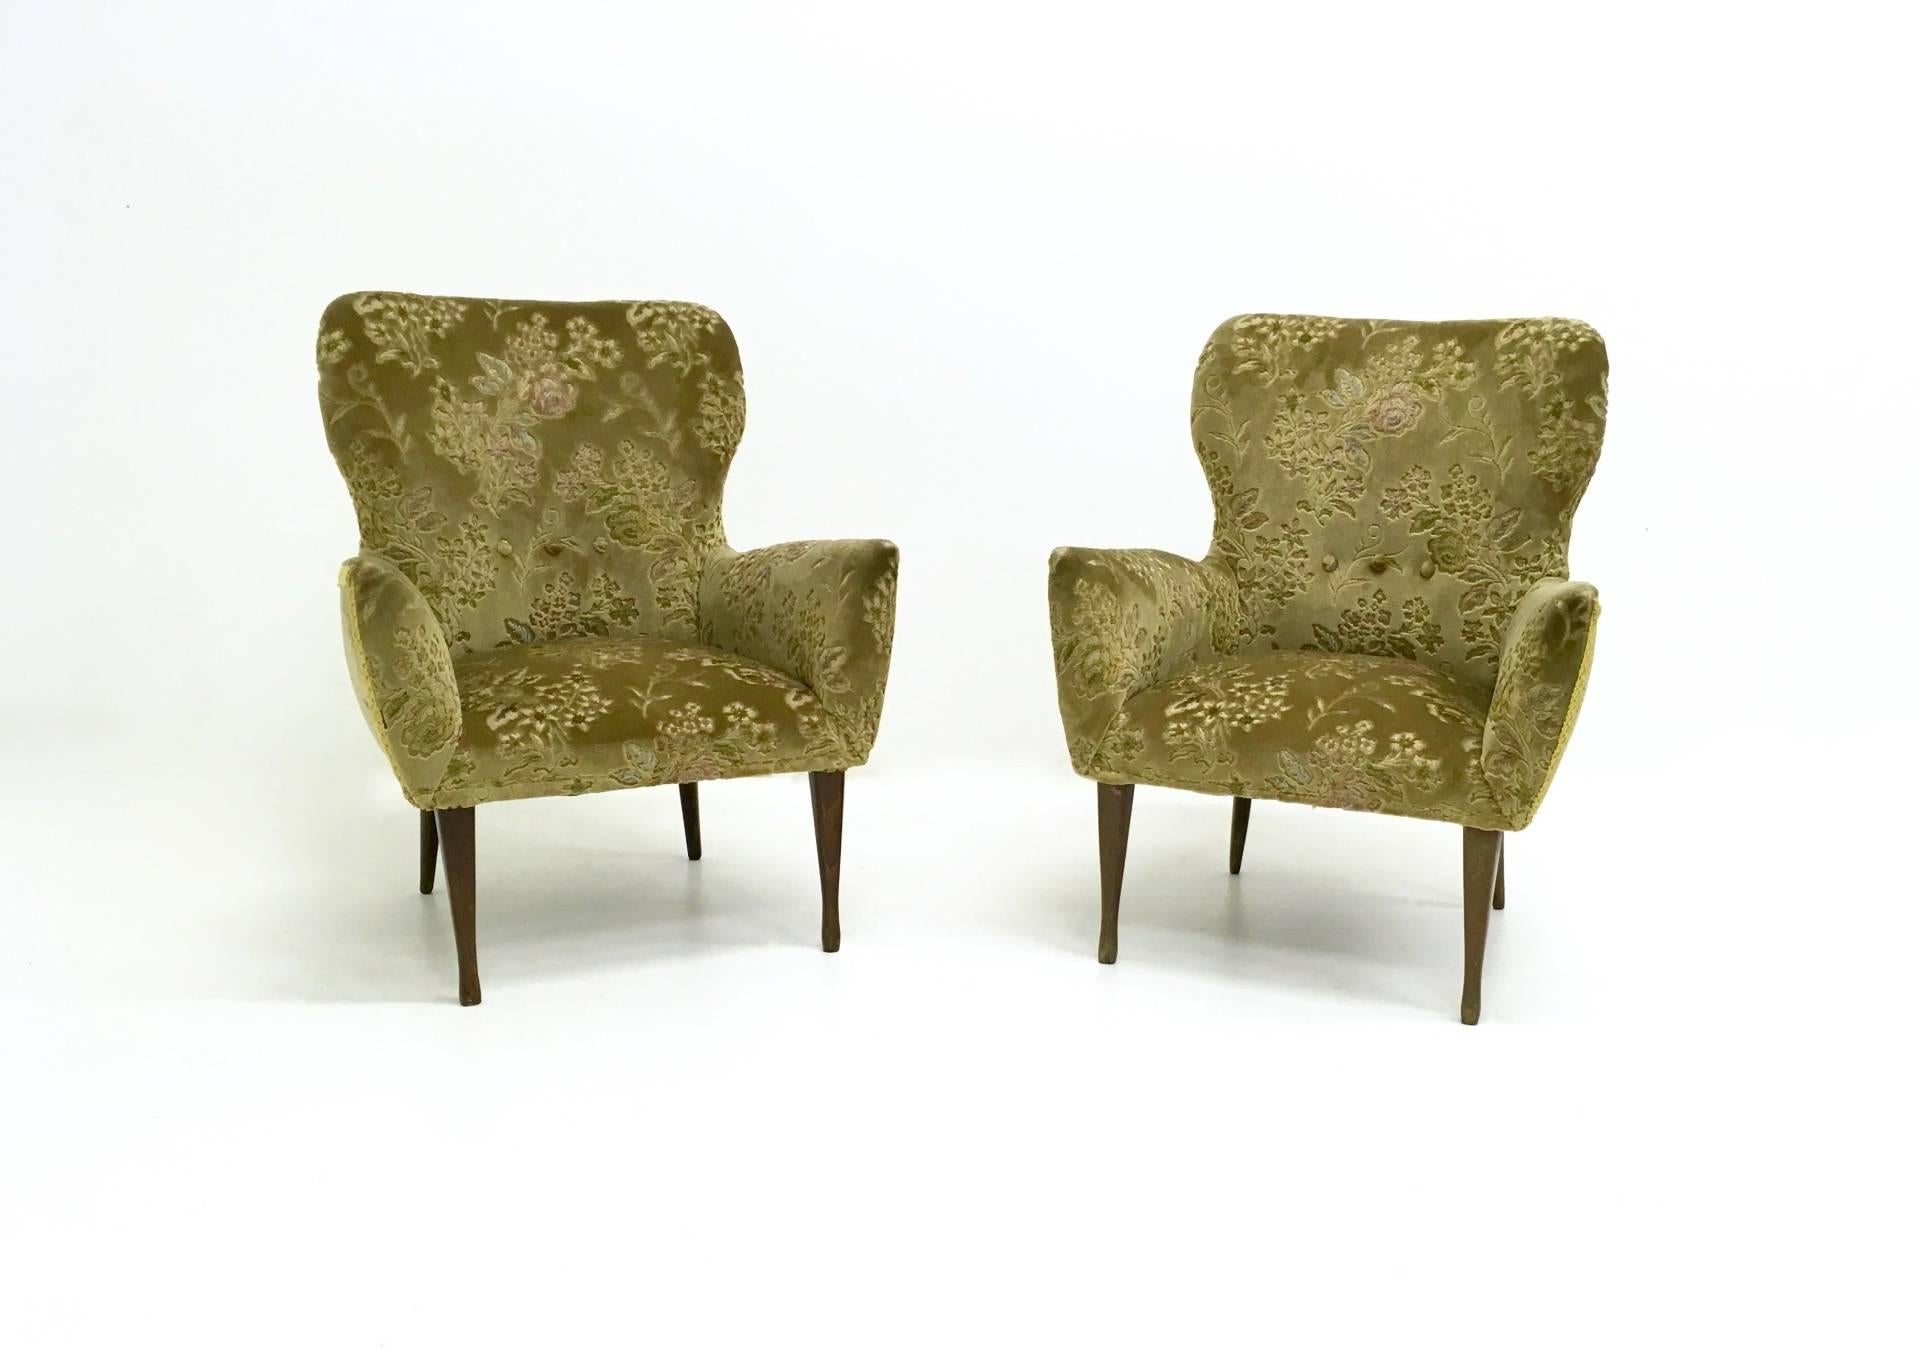 They feature a wood structure and are upholstered in their original velvet.
In good original condition.